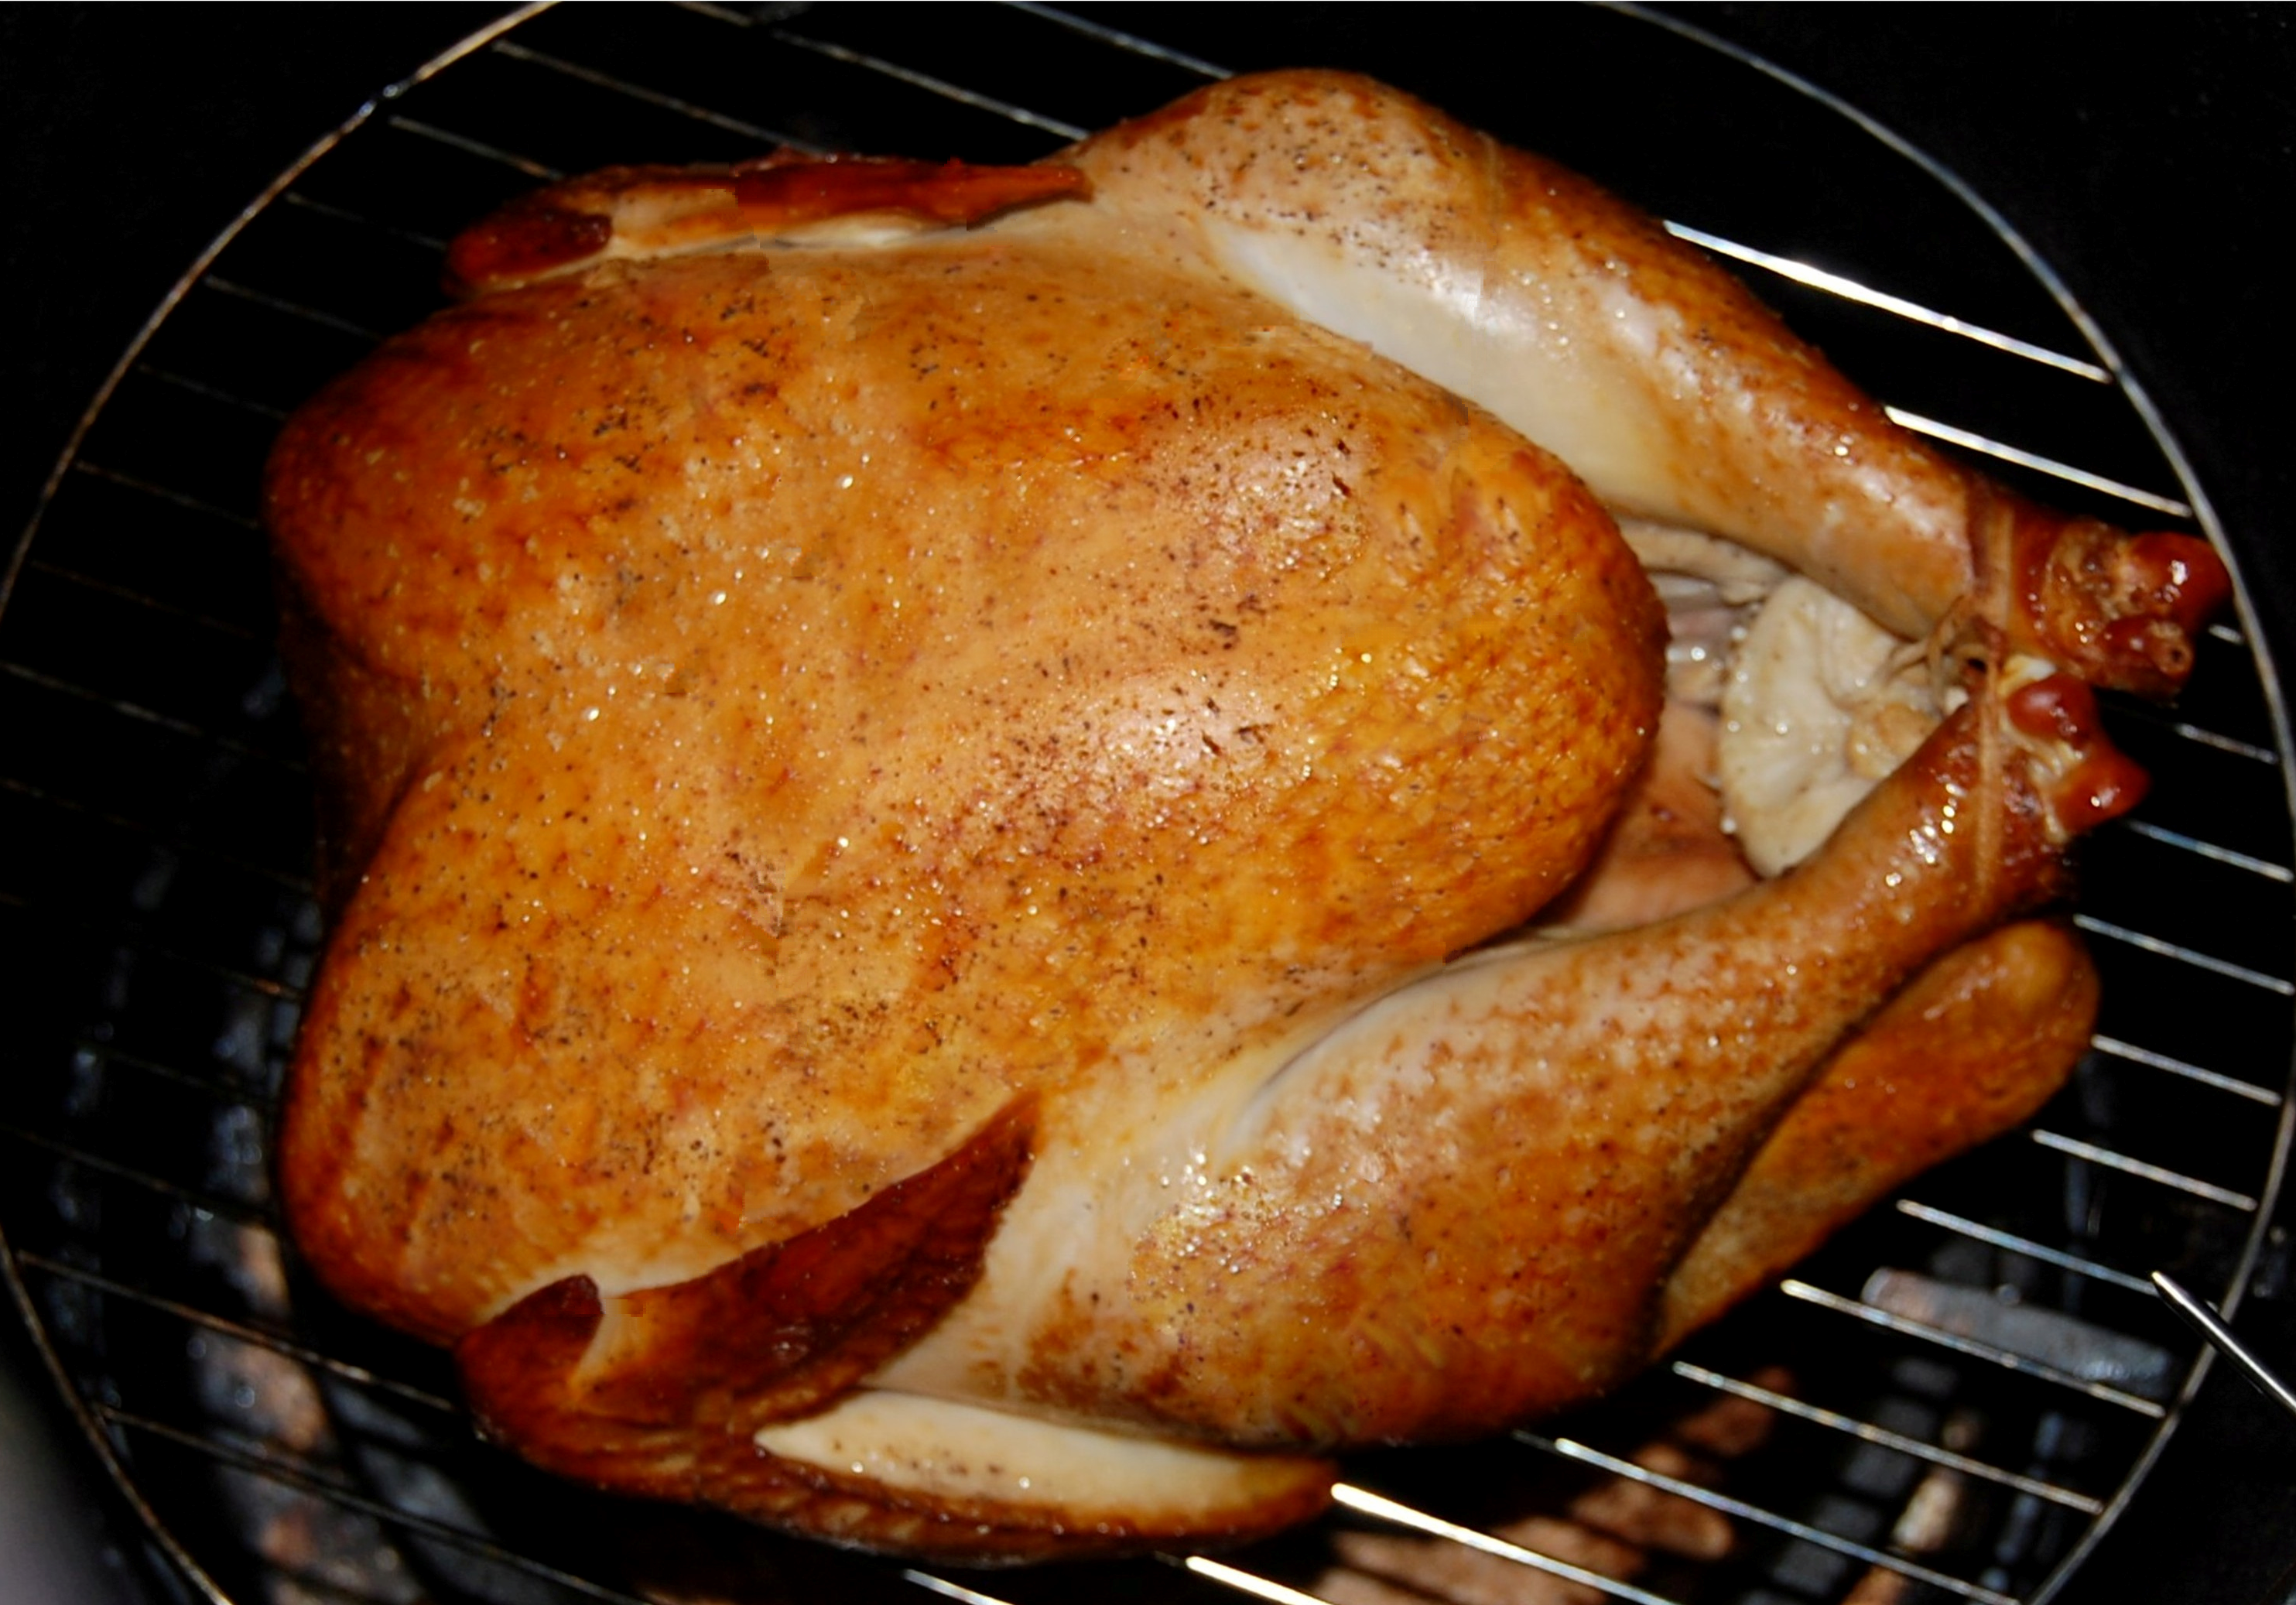 https://www.cookingmamas.com/wp-content/uploads/2013/11/Smoked-Turkey-7.png